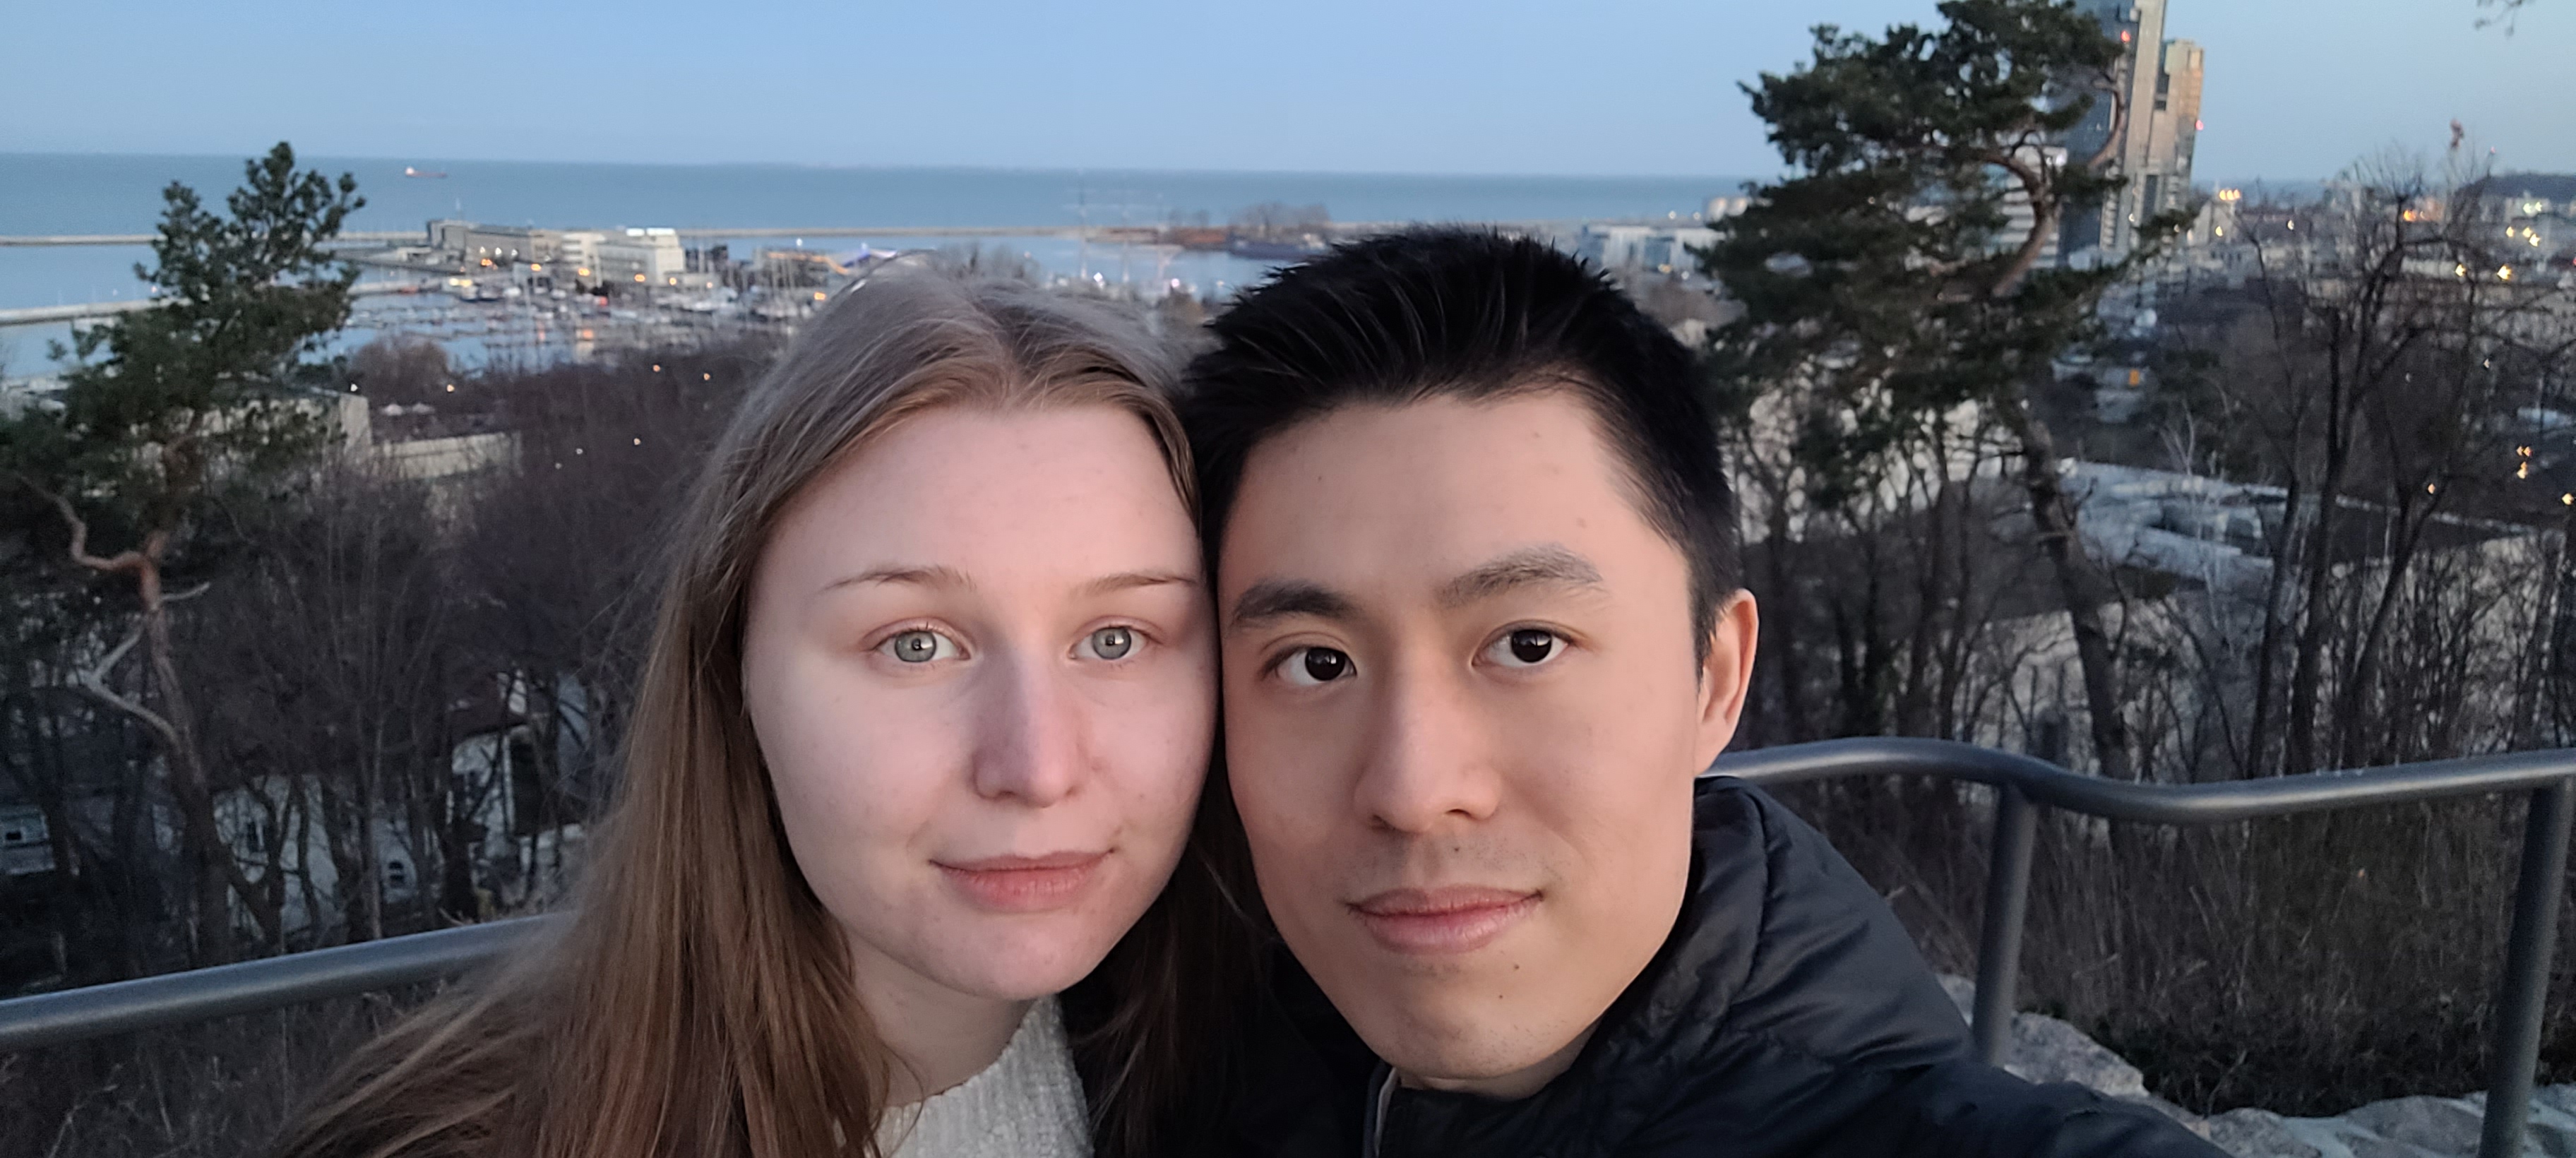 My girlfriend and I during our weekend trip to Gdynia, Poland